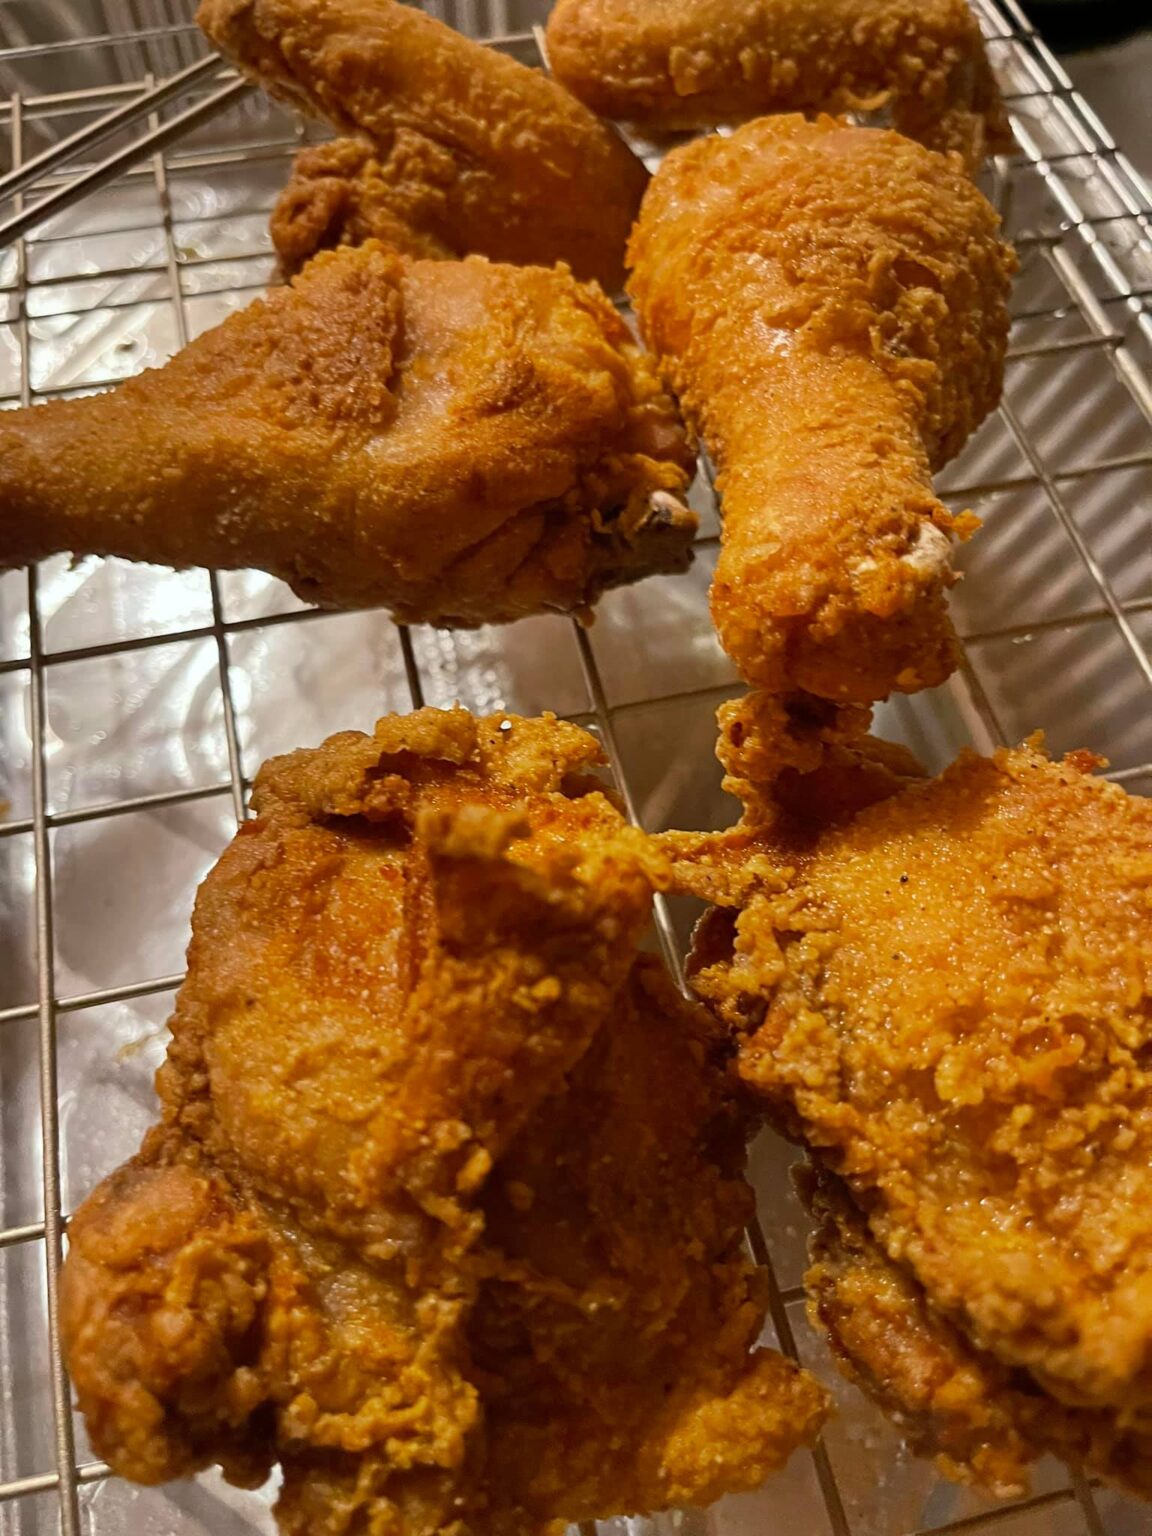 Spicy Southern fried chicken